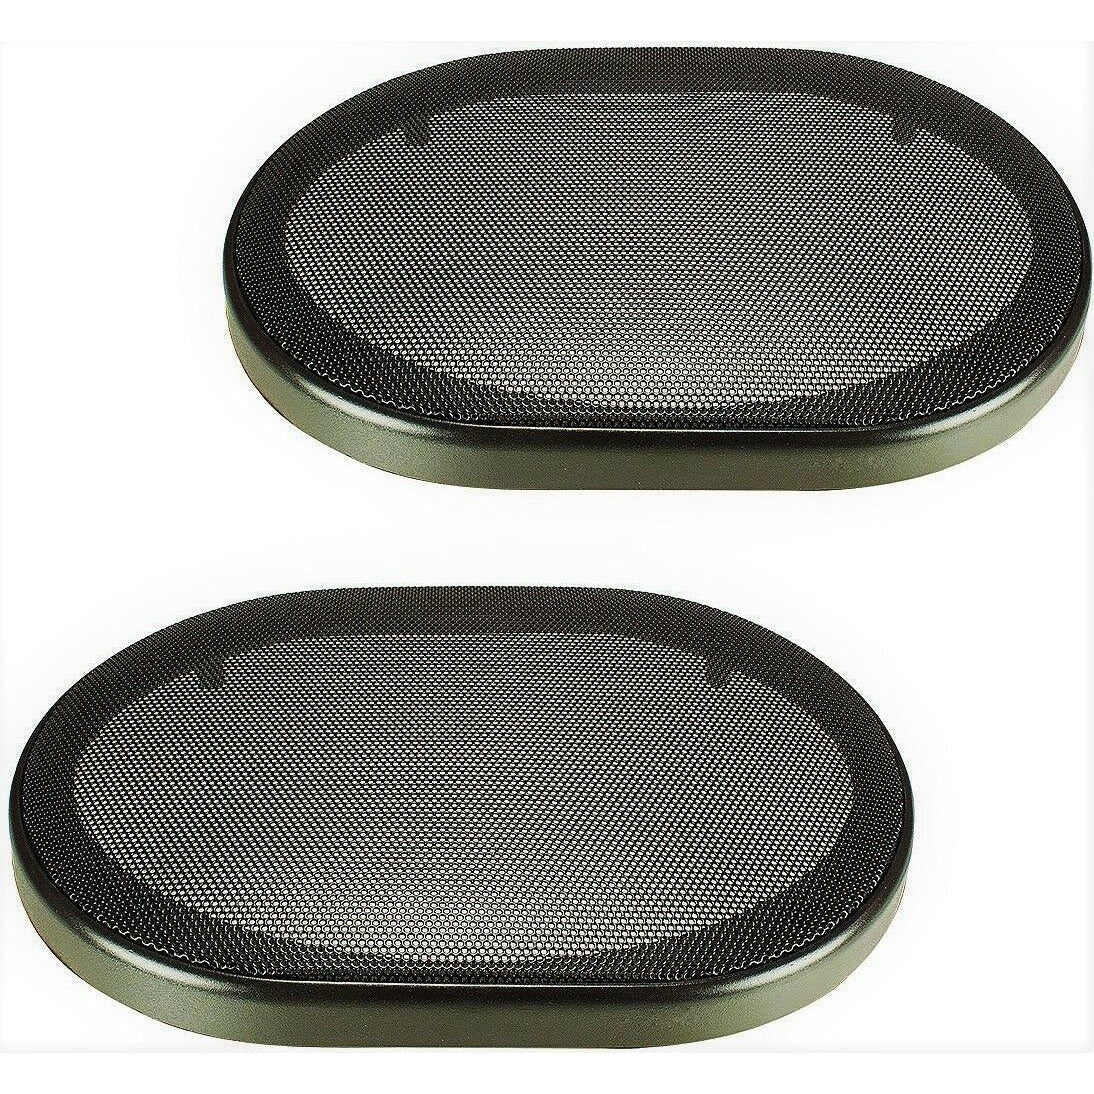 2 American Terminal CS6x9 6x9" Speaker Grill Universal 6x9" Car Speaker Coaxial Component Protective Grills Covers